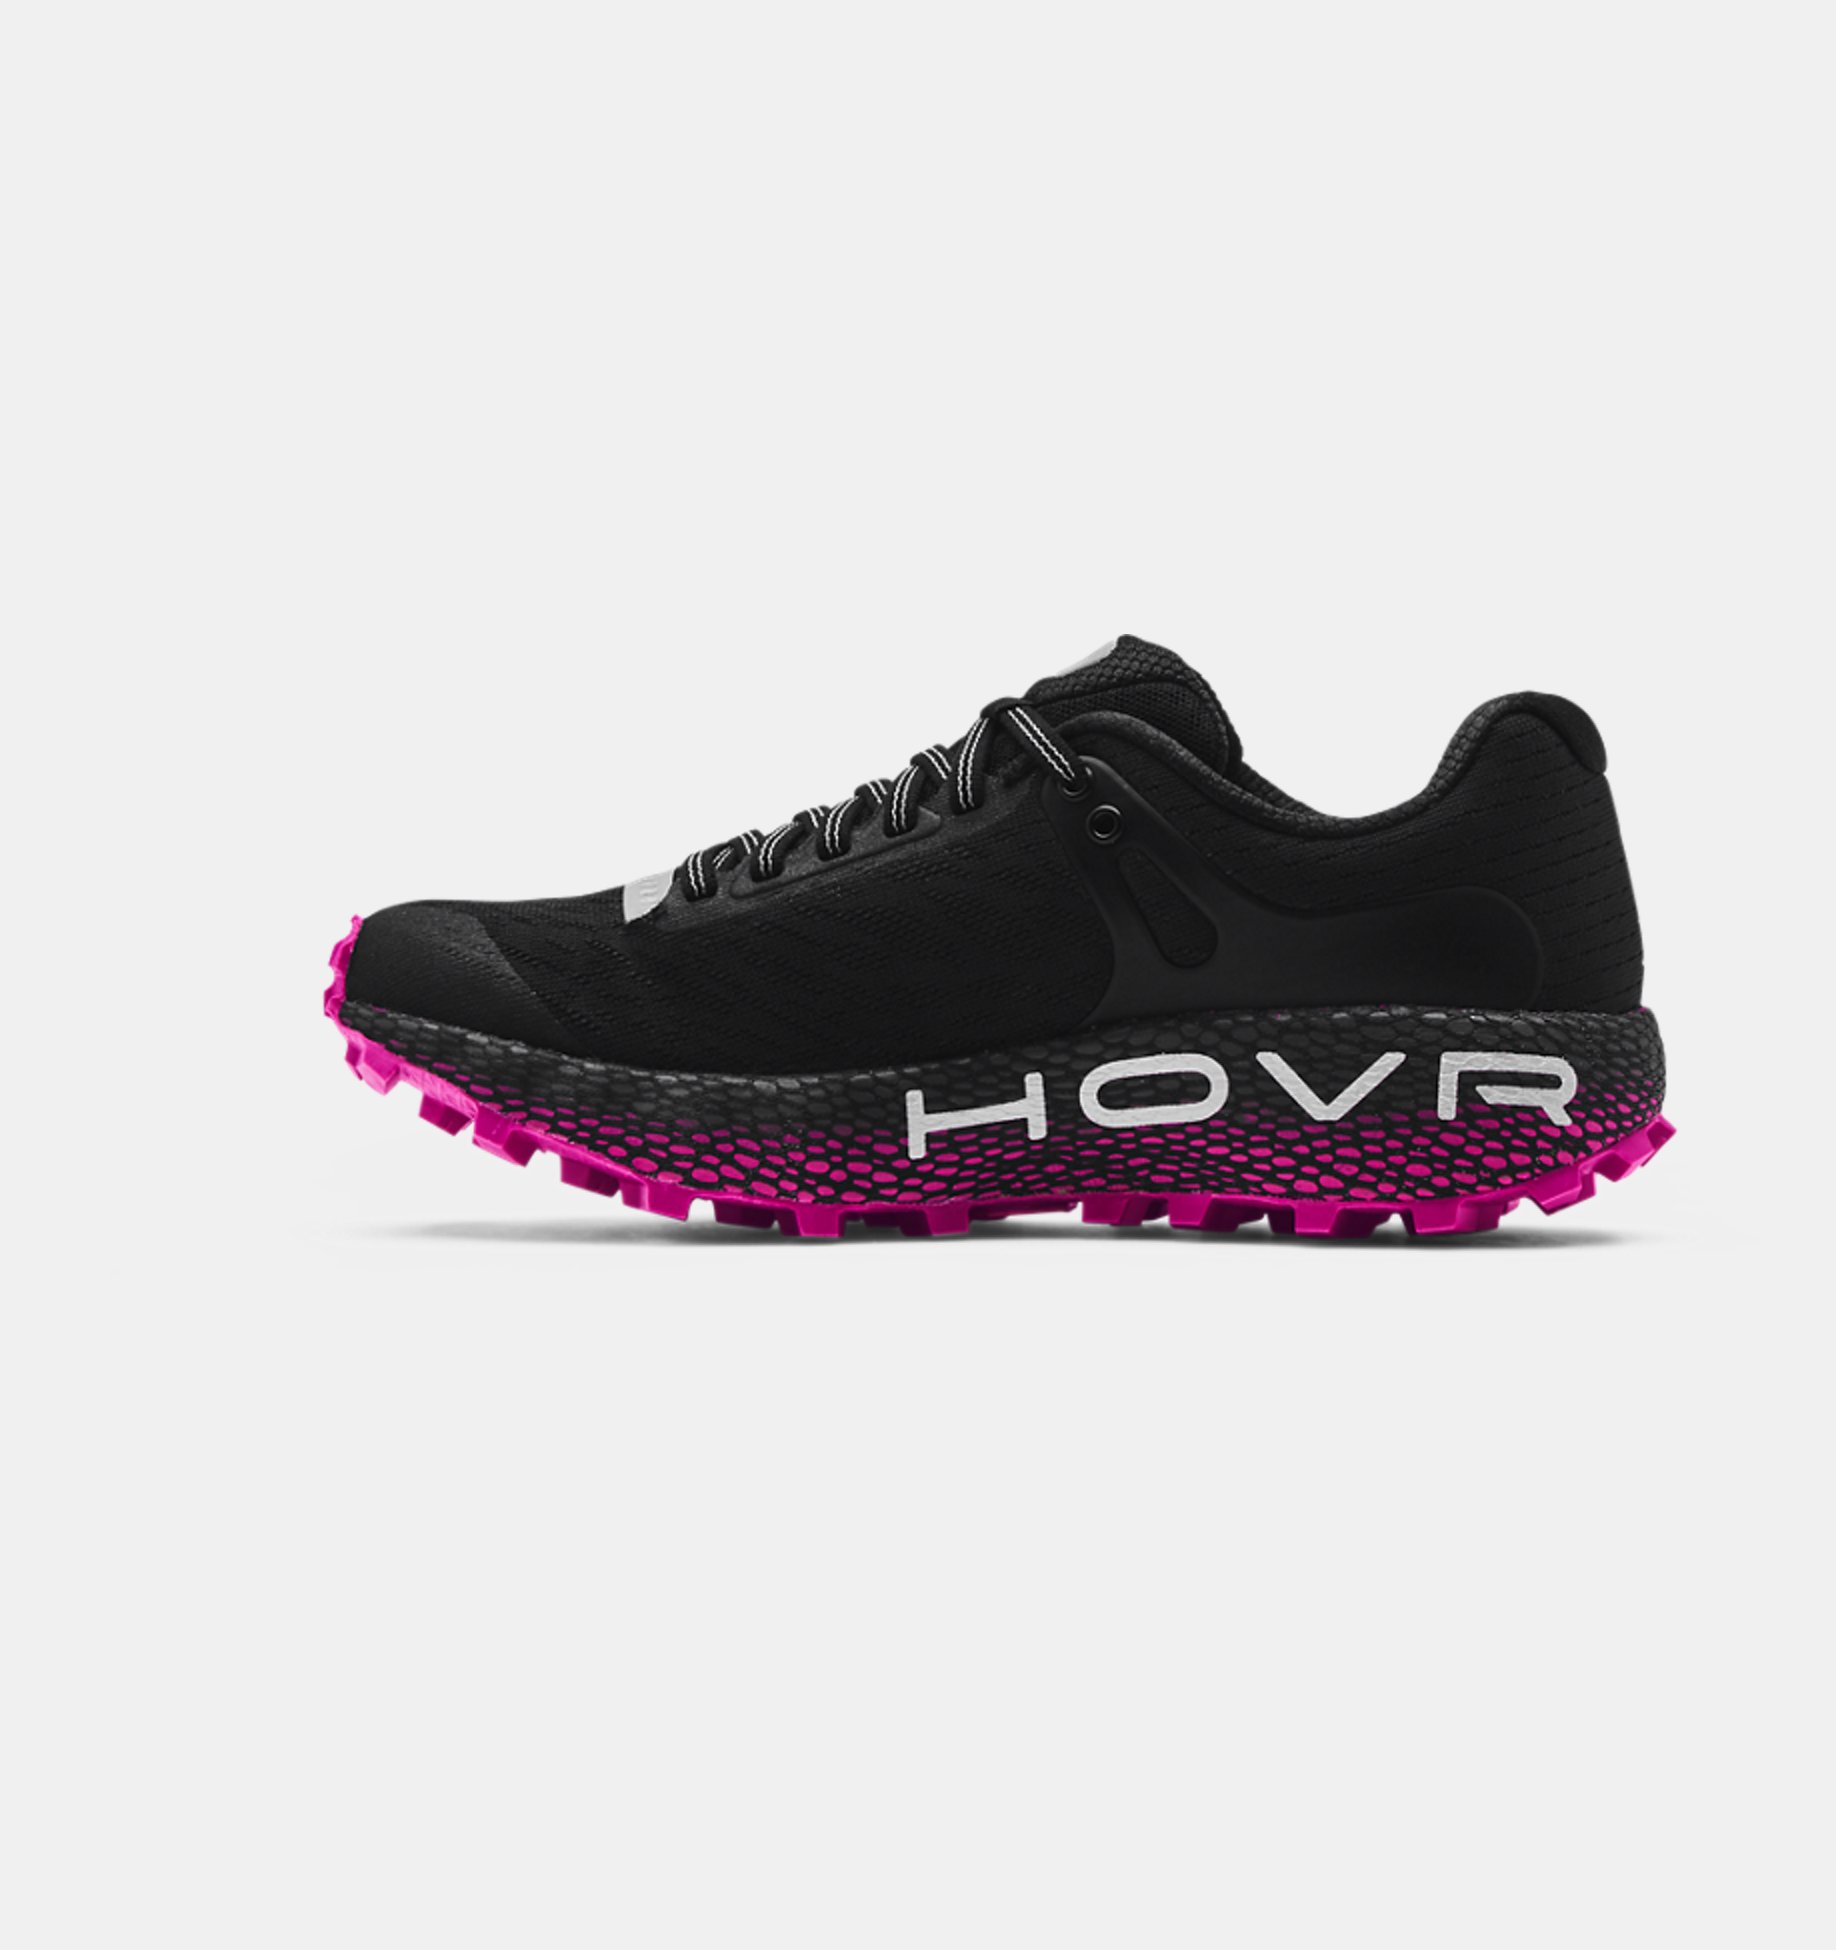 Under Armour HOVR Machina Off Road Womens Trail Running Shoes Black Pink 